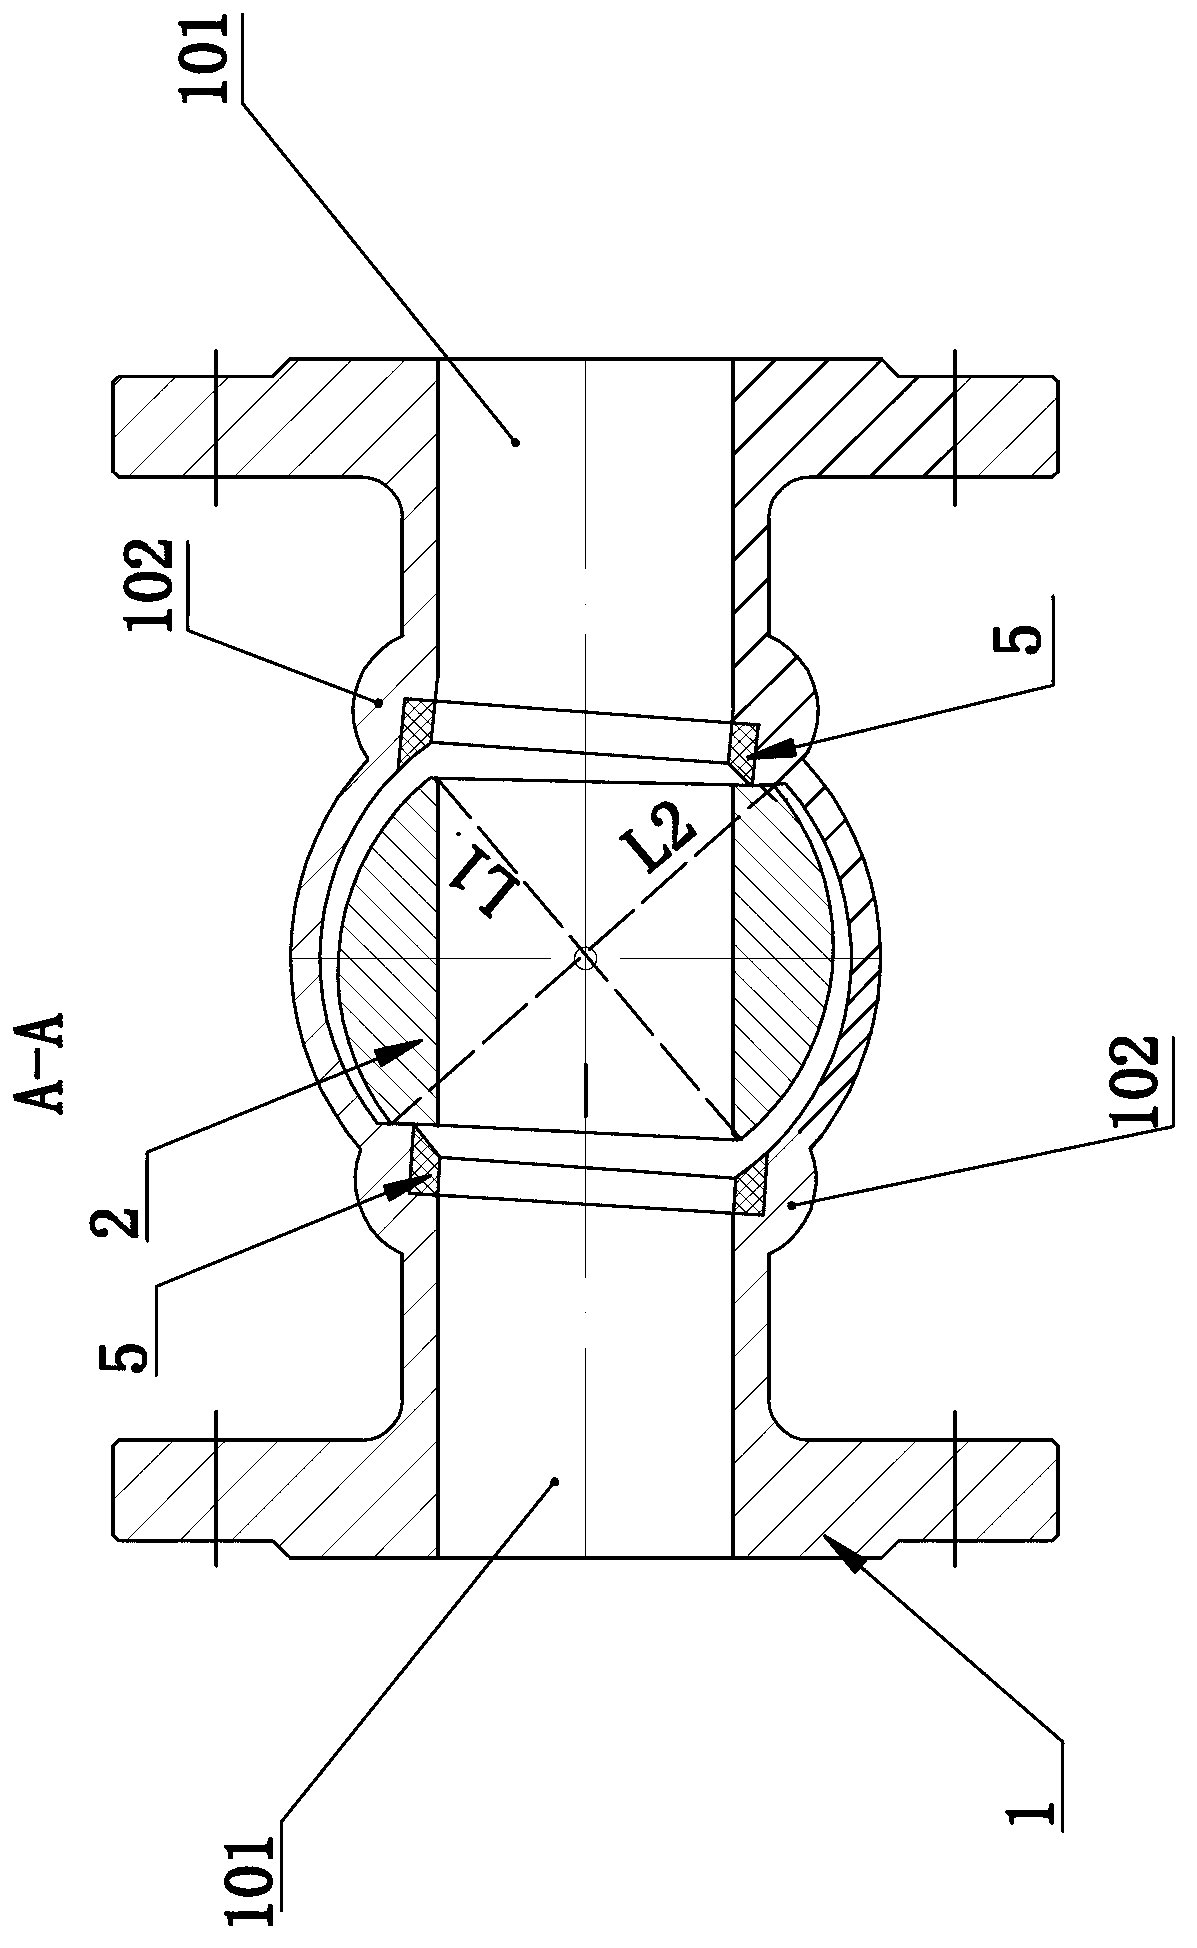 Up-mounting type double-eccentricity ball valve